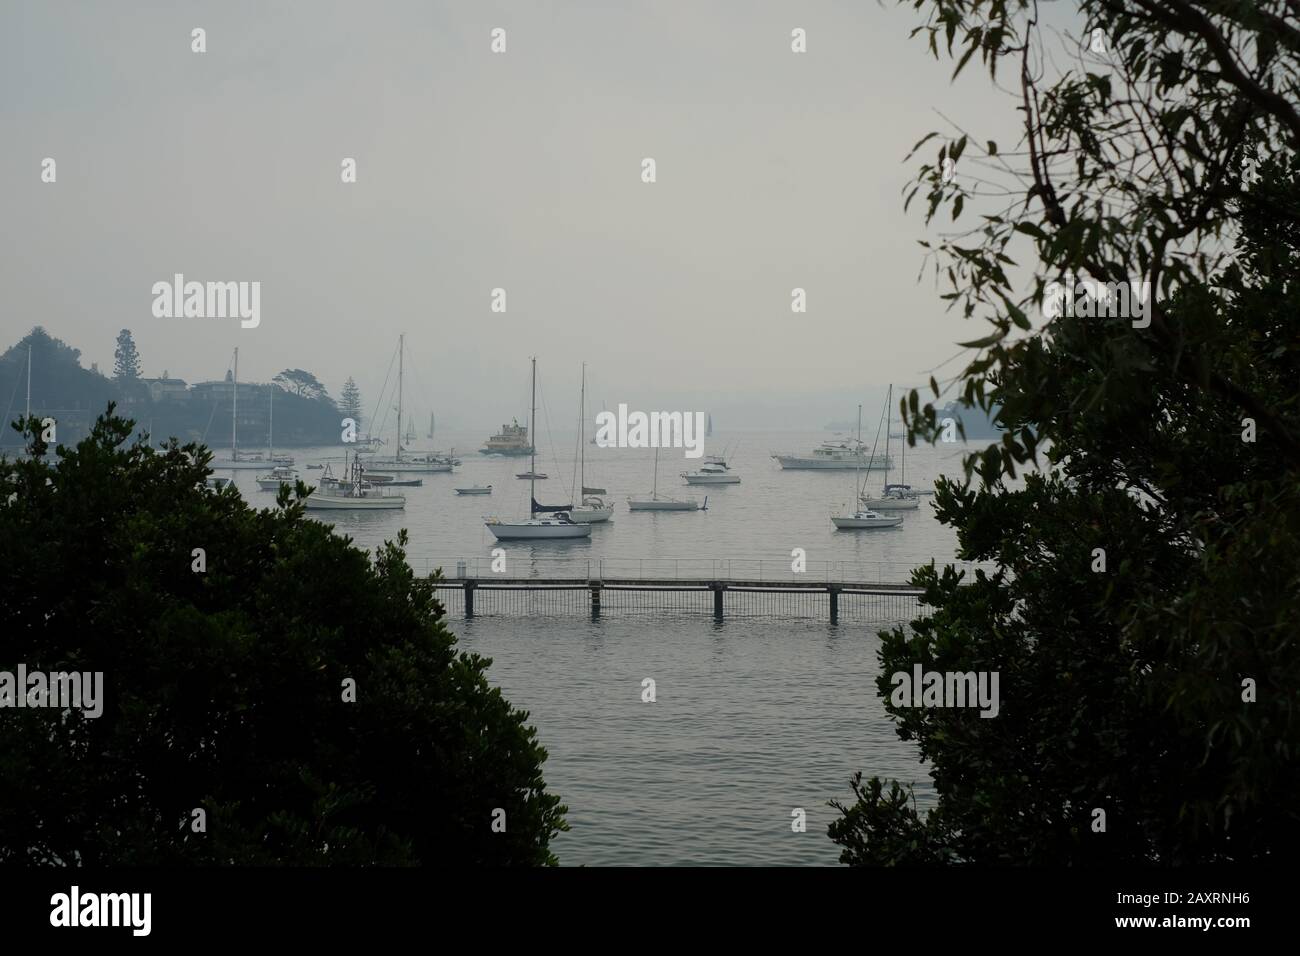 Climate Change Australia - Looking through trees and bushfire smoke haze hanging over moored boats, beach and Murray Rose pool on Sydney Harbour Stock Photo